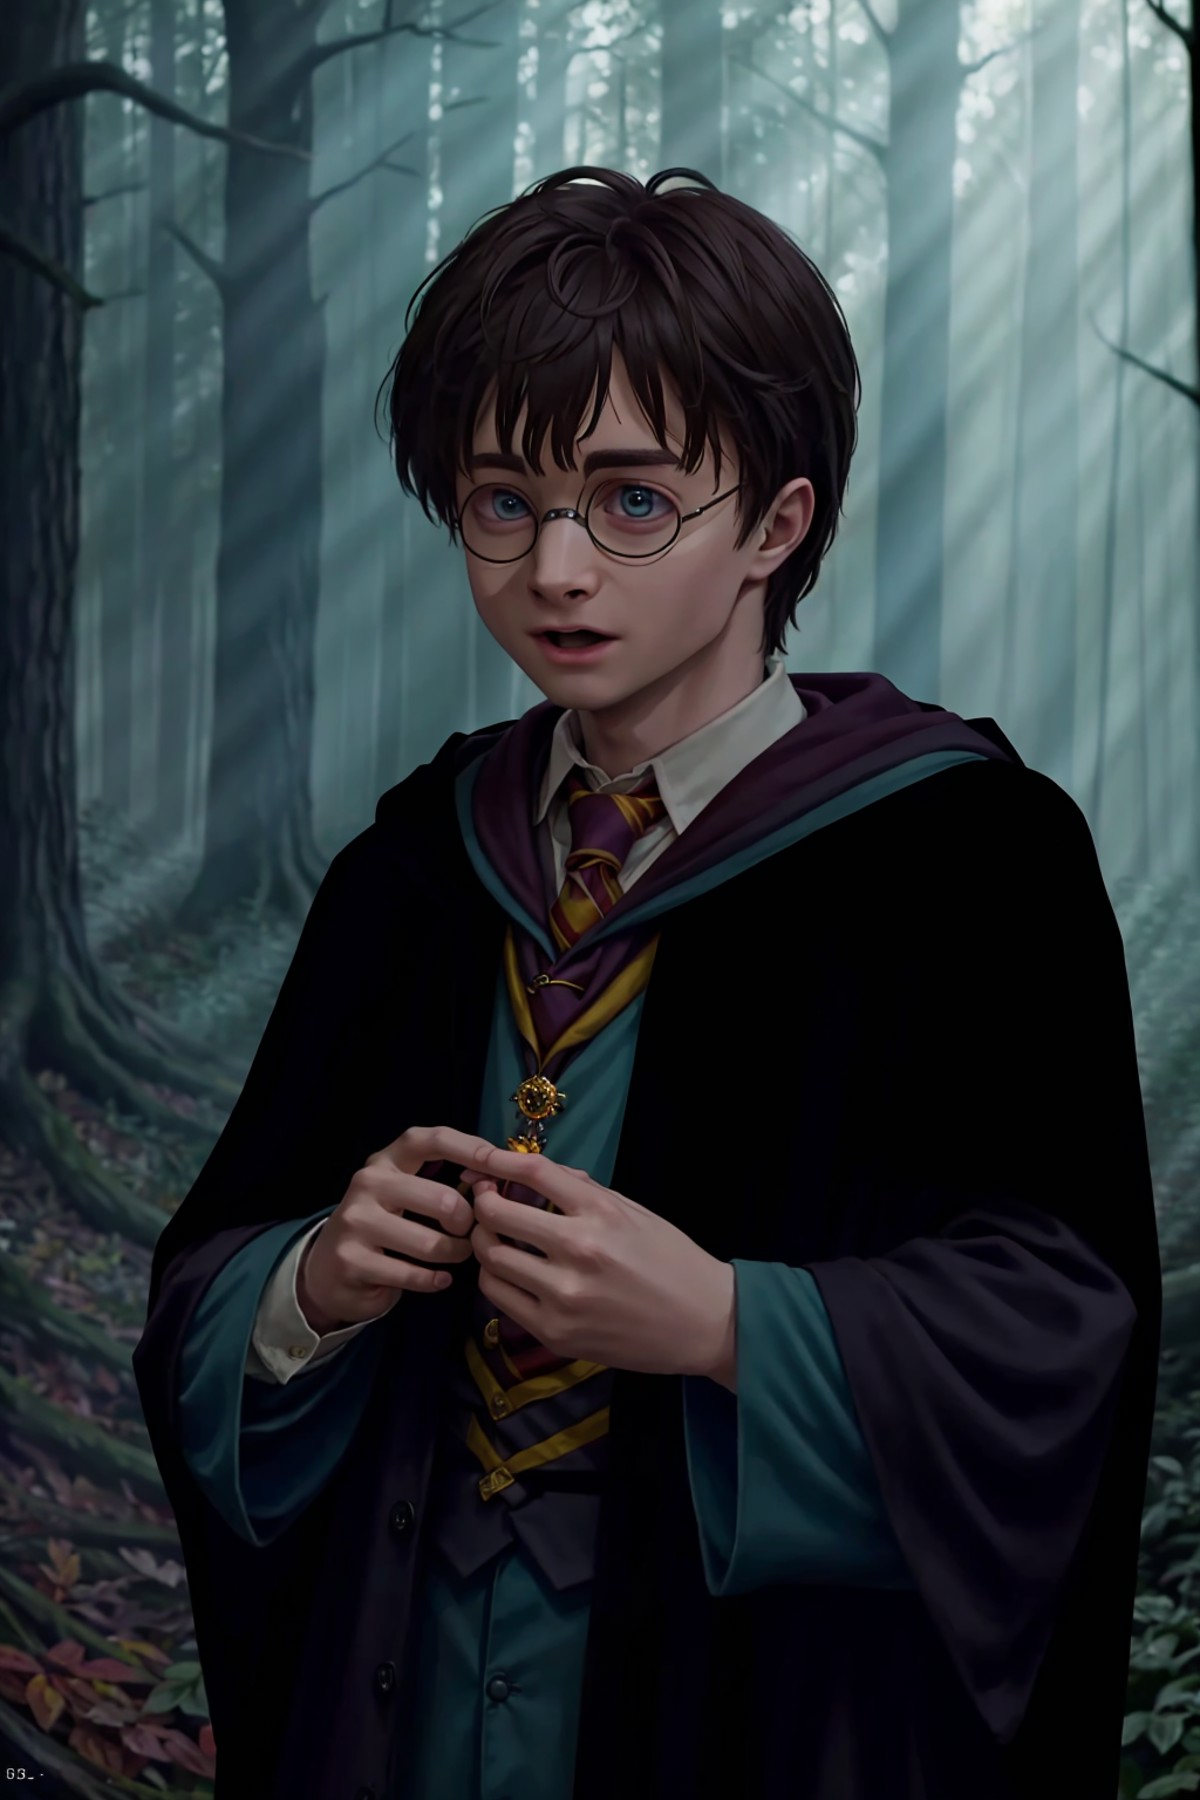 harry potter, standing in a magical dark forest wearing glasses and robes
(masterpiece:1.2) (photorealistic:1.2) (bokeh) (...